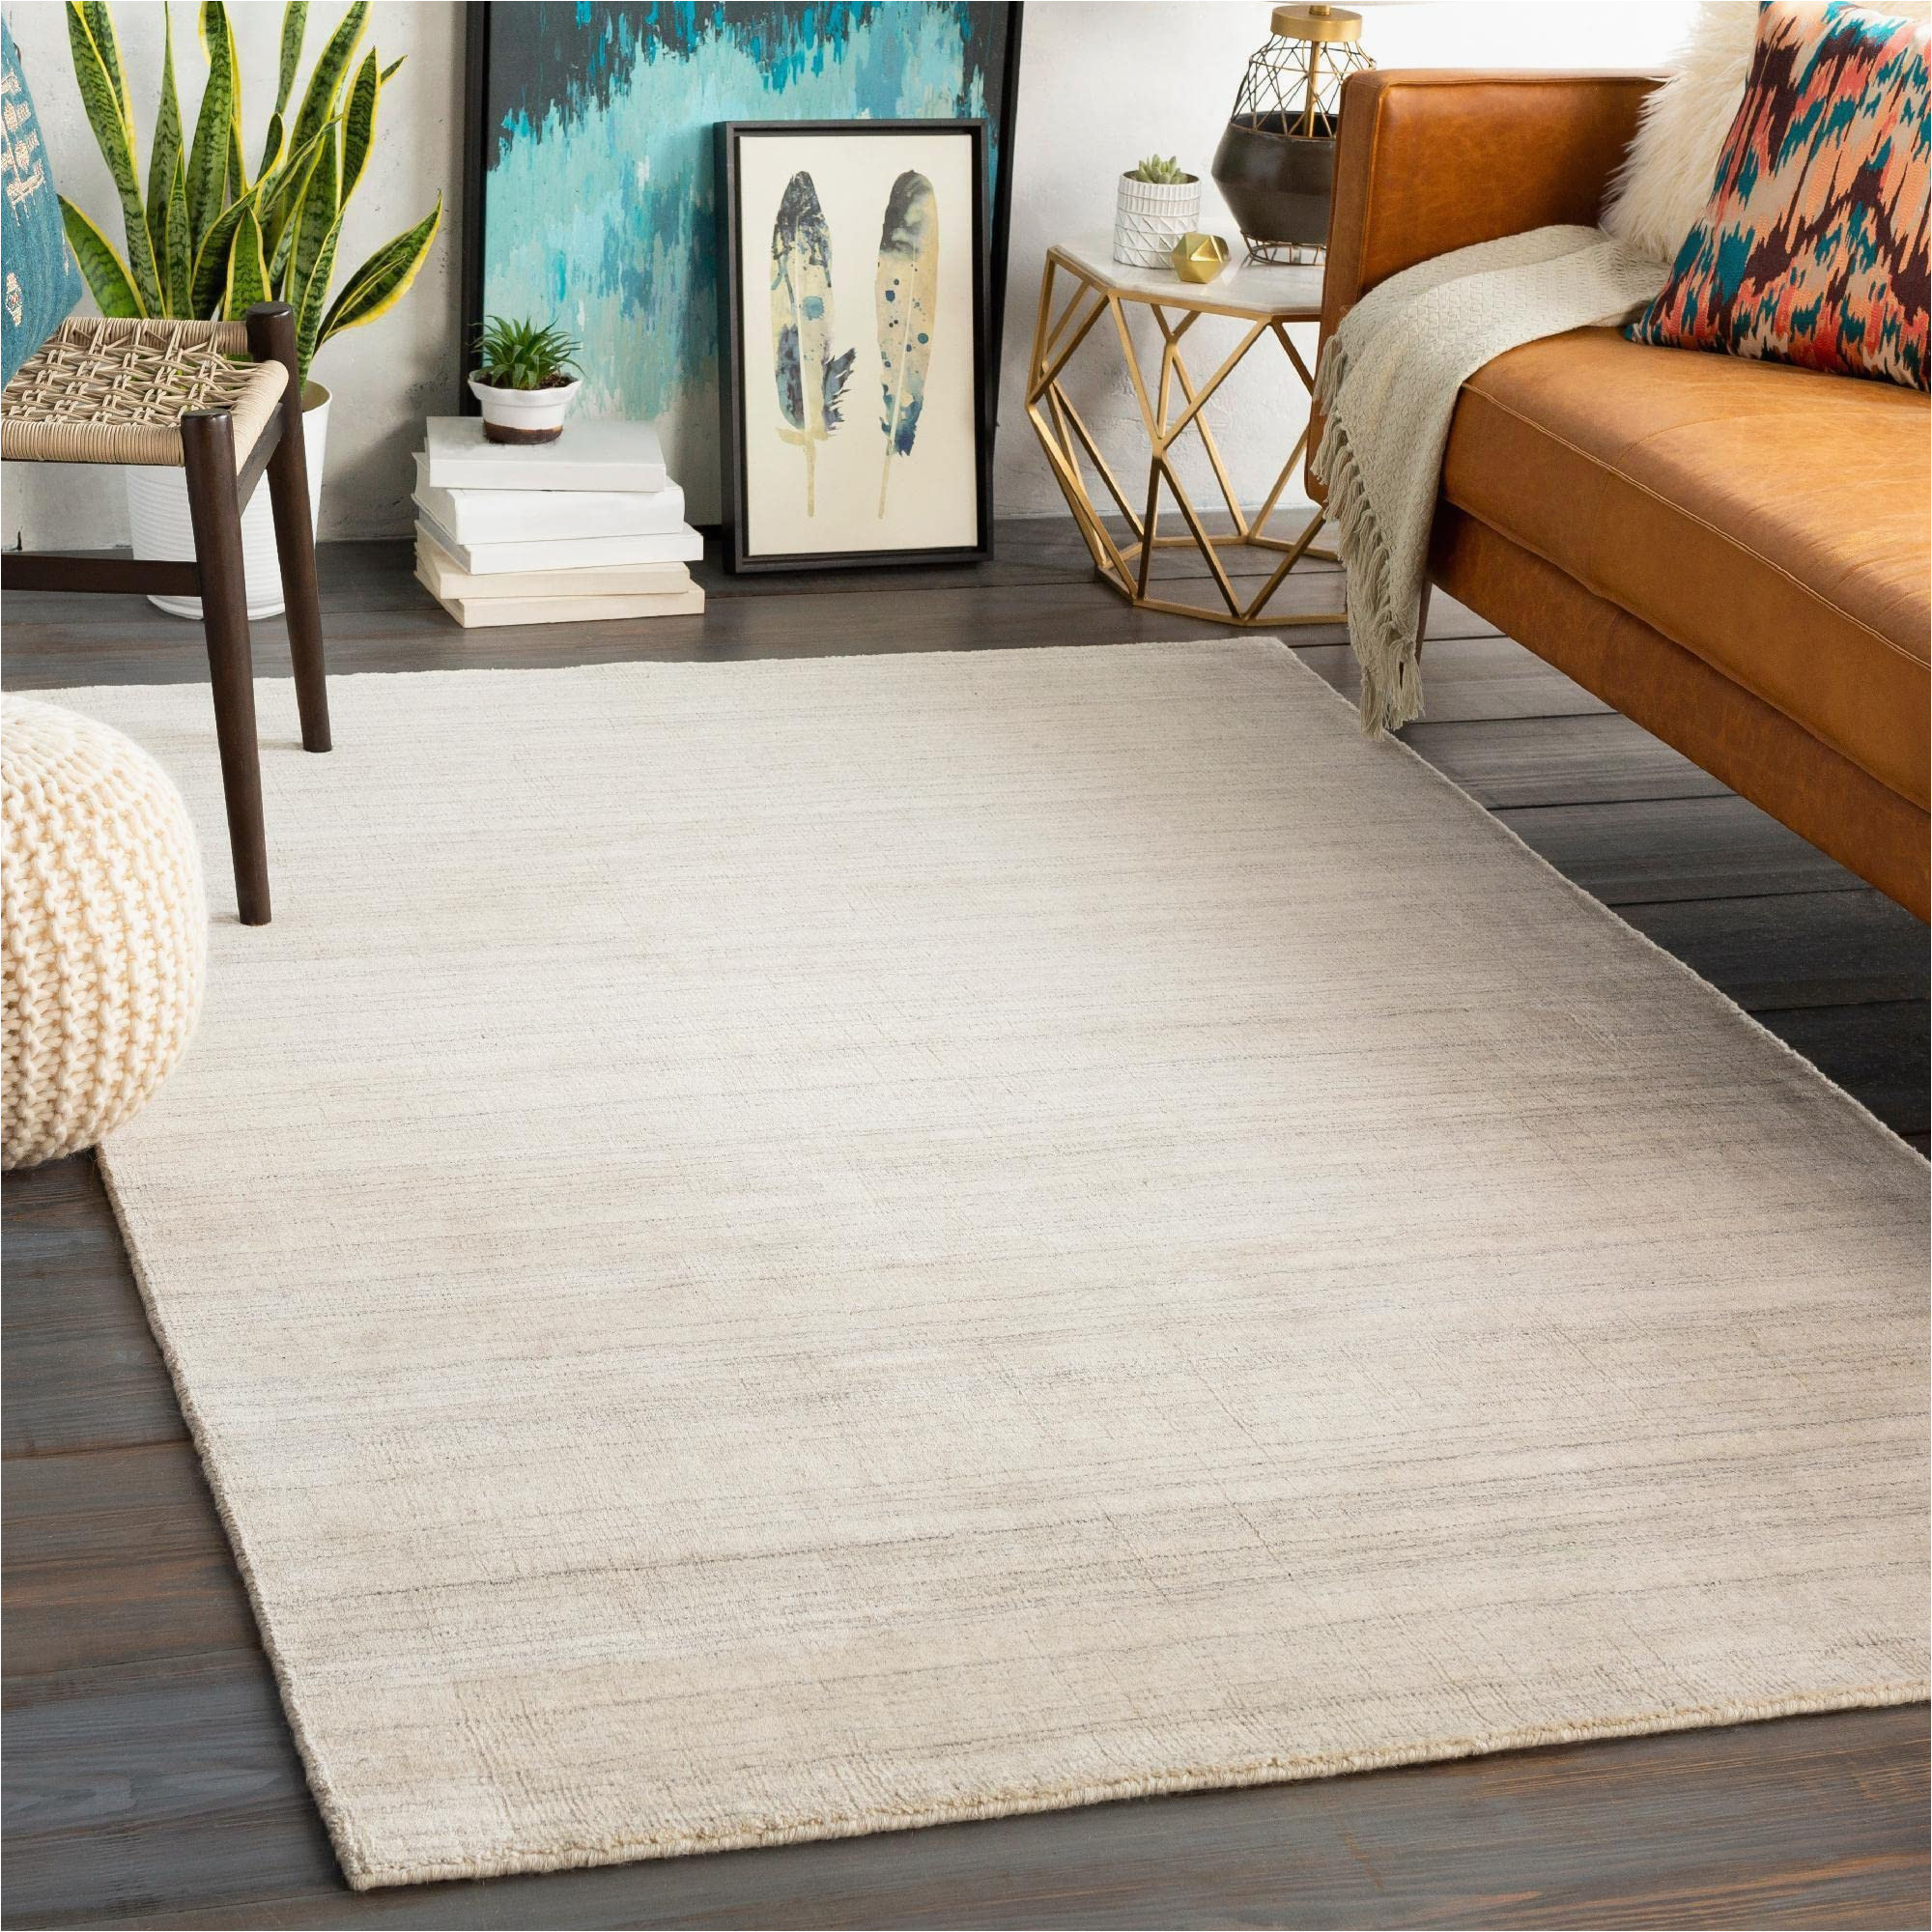 Solid Beige area Rug 8×10 Mark&day area Rugs, 8×10 southport solid and Border Beige area Rug Beige Carpet for Living Room, Bedroom or Kitchen (8′ X 10′)